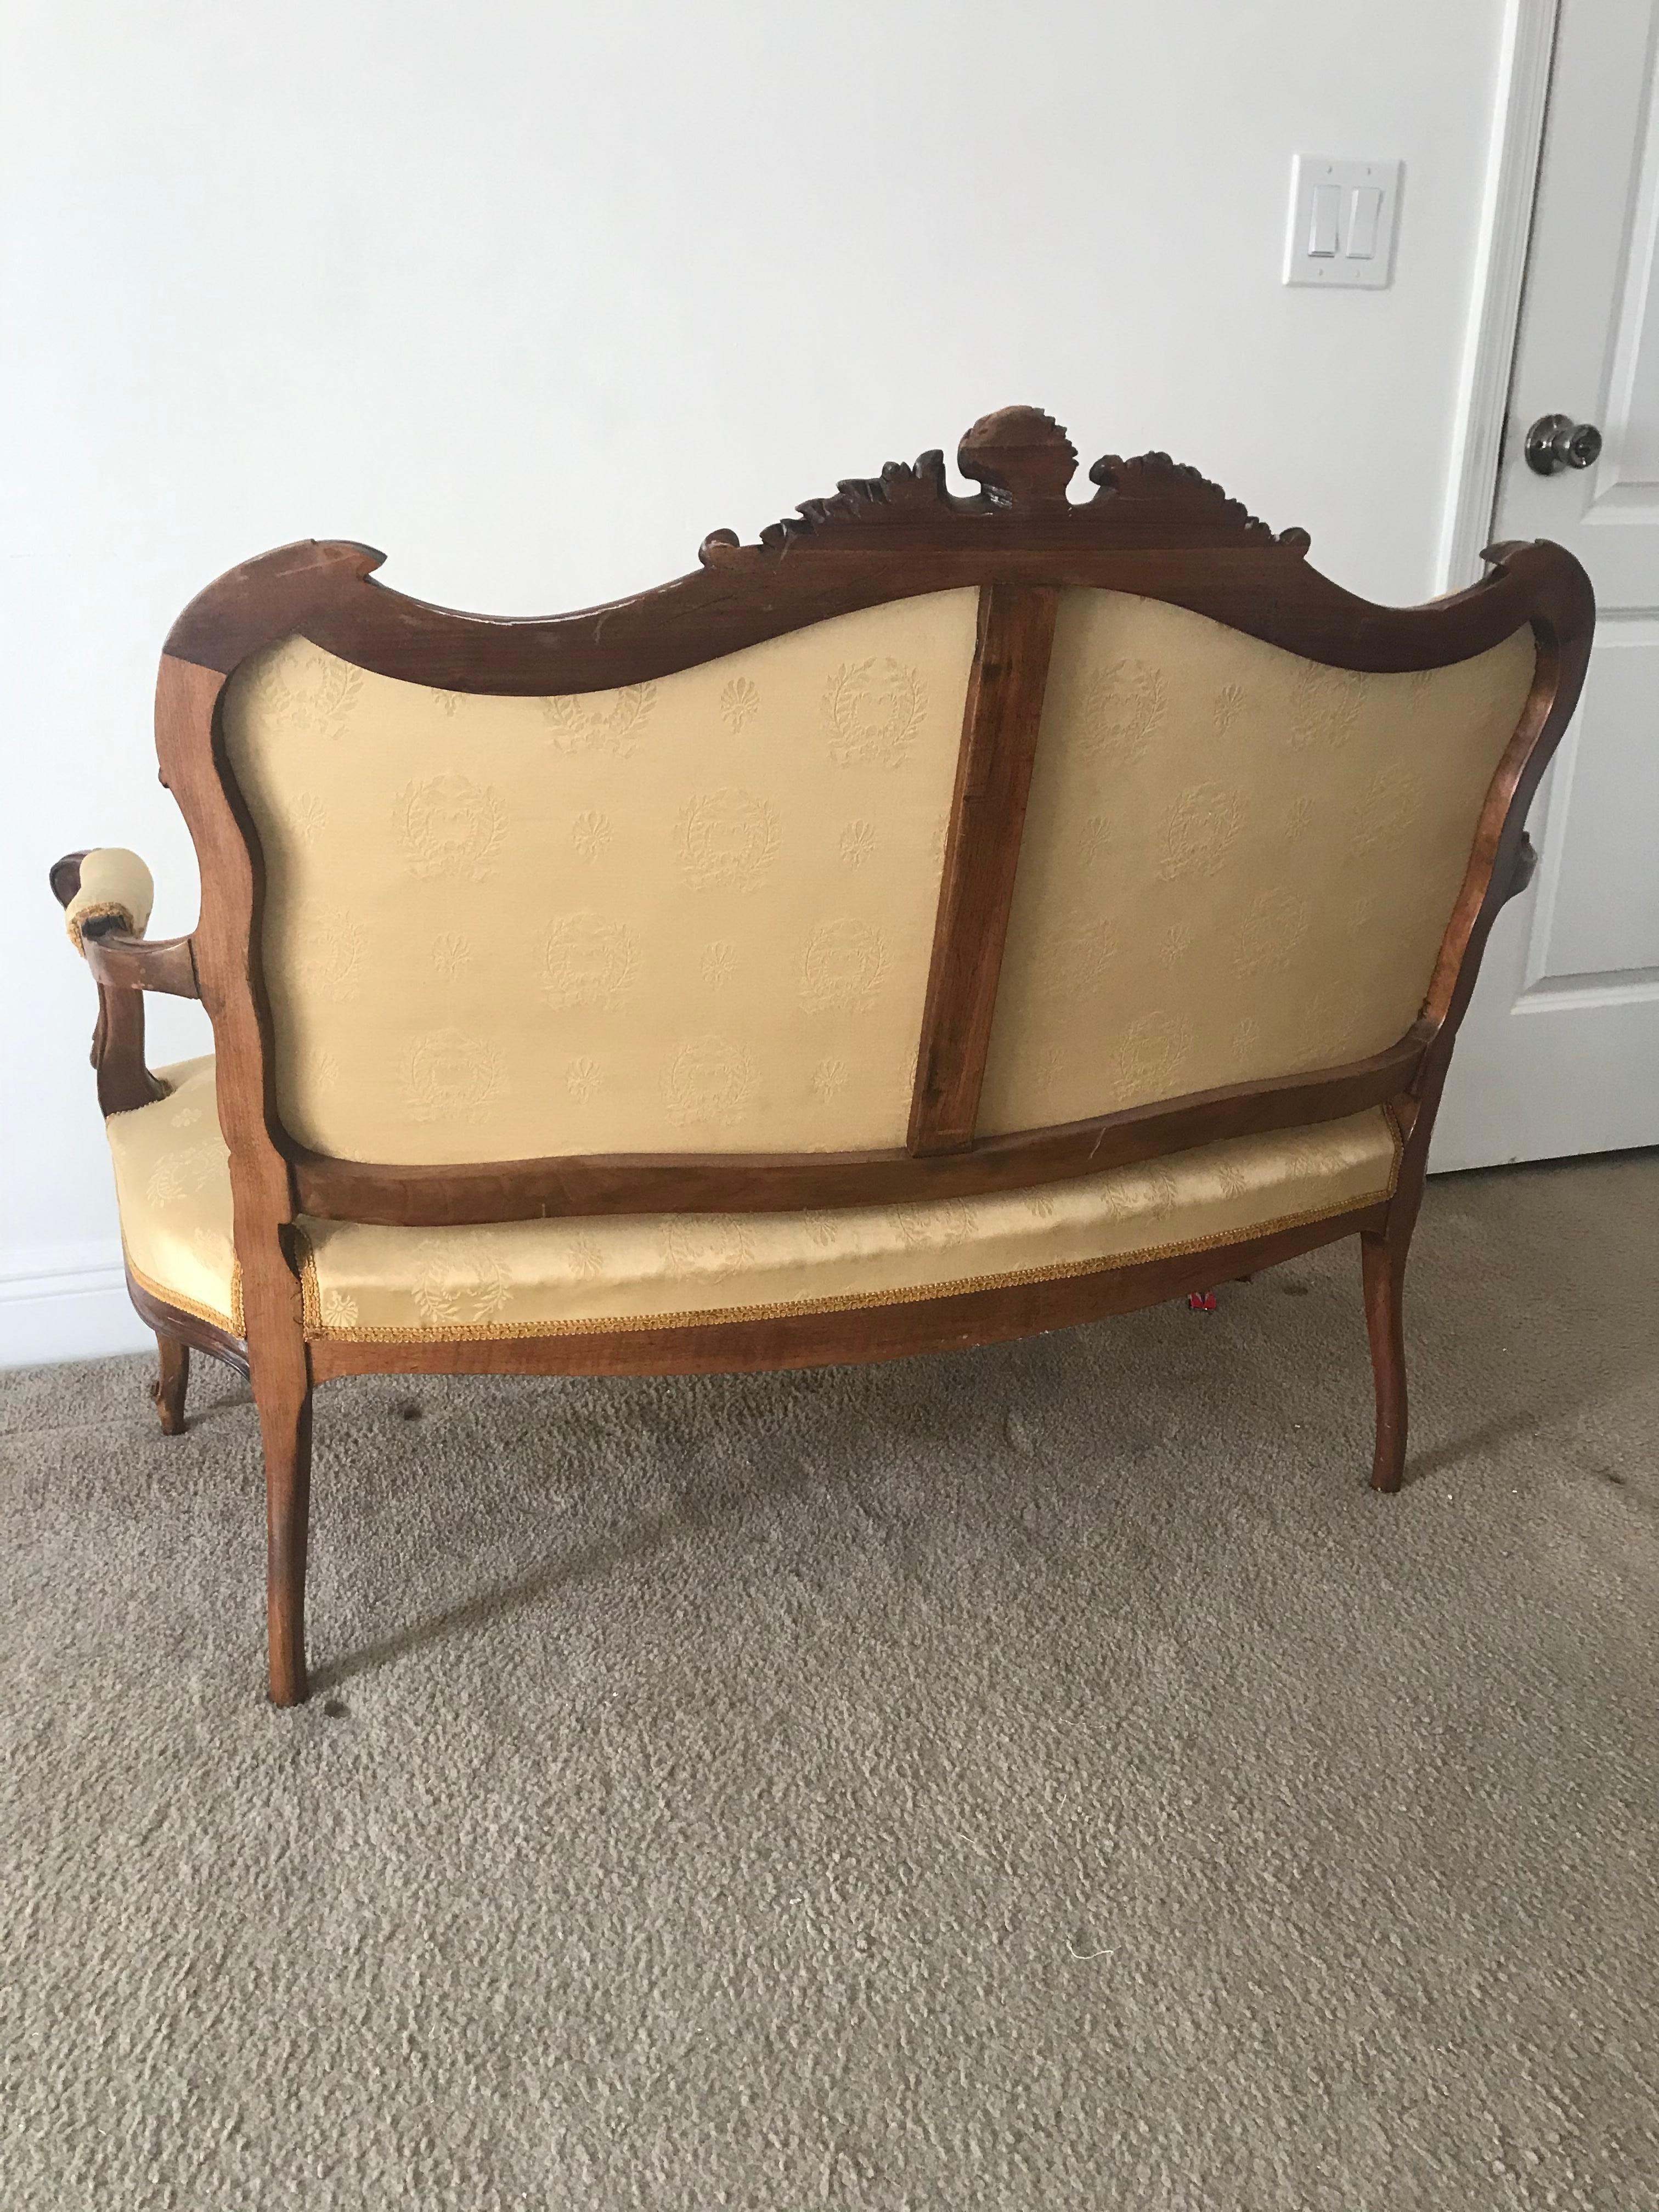 19th Century Antique French Louis XVI Sofa Settee Carved Walnut For Sale 1